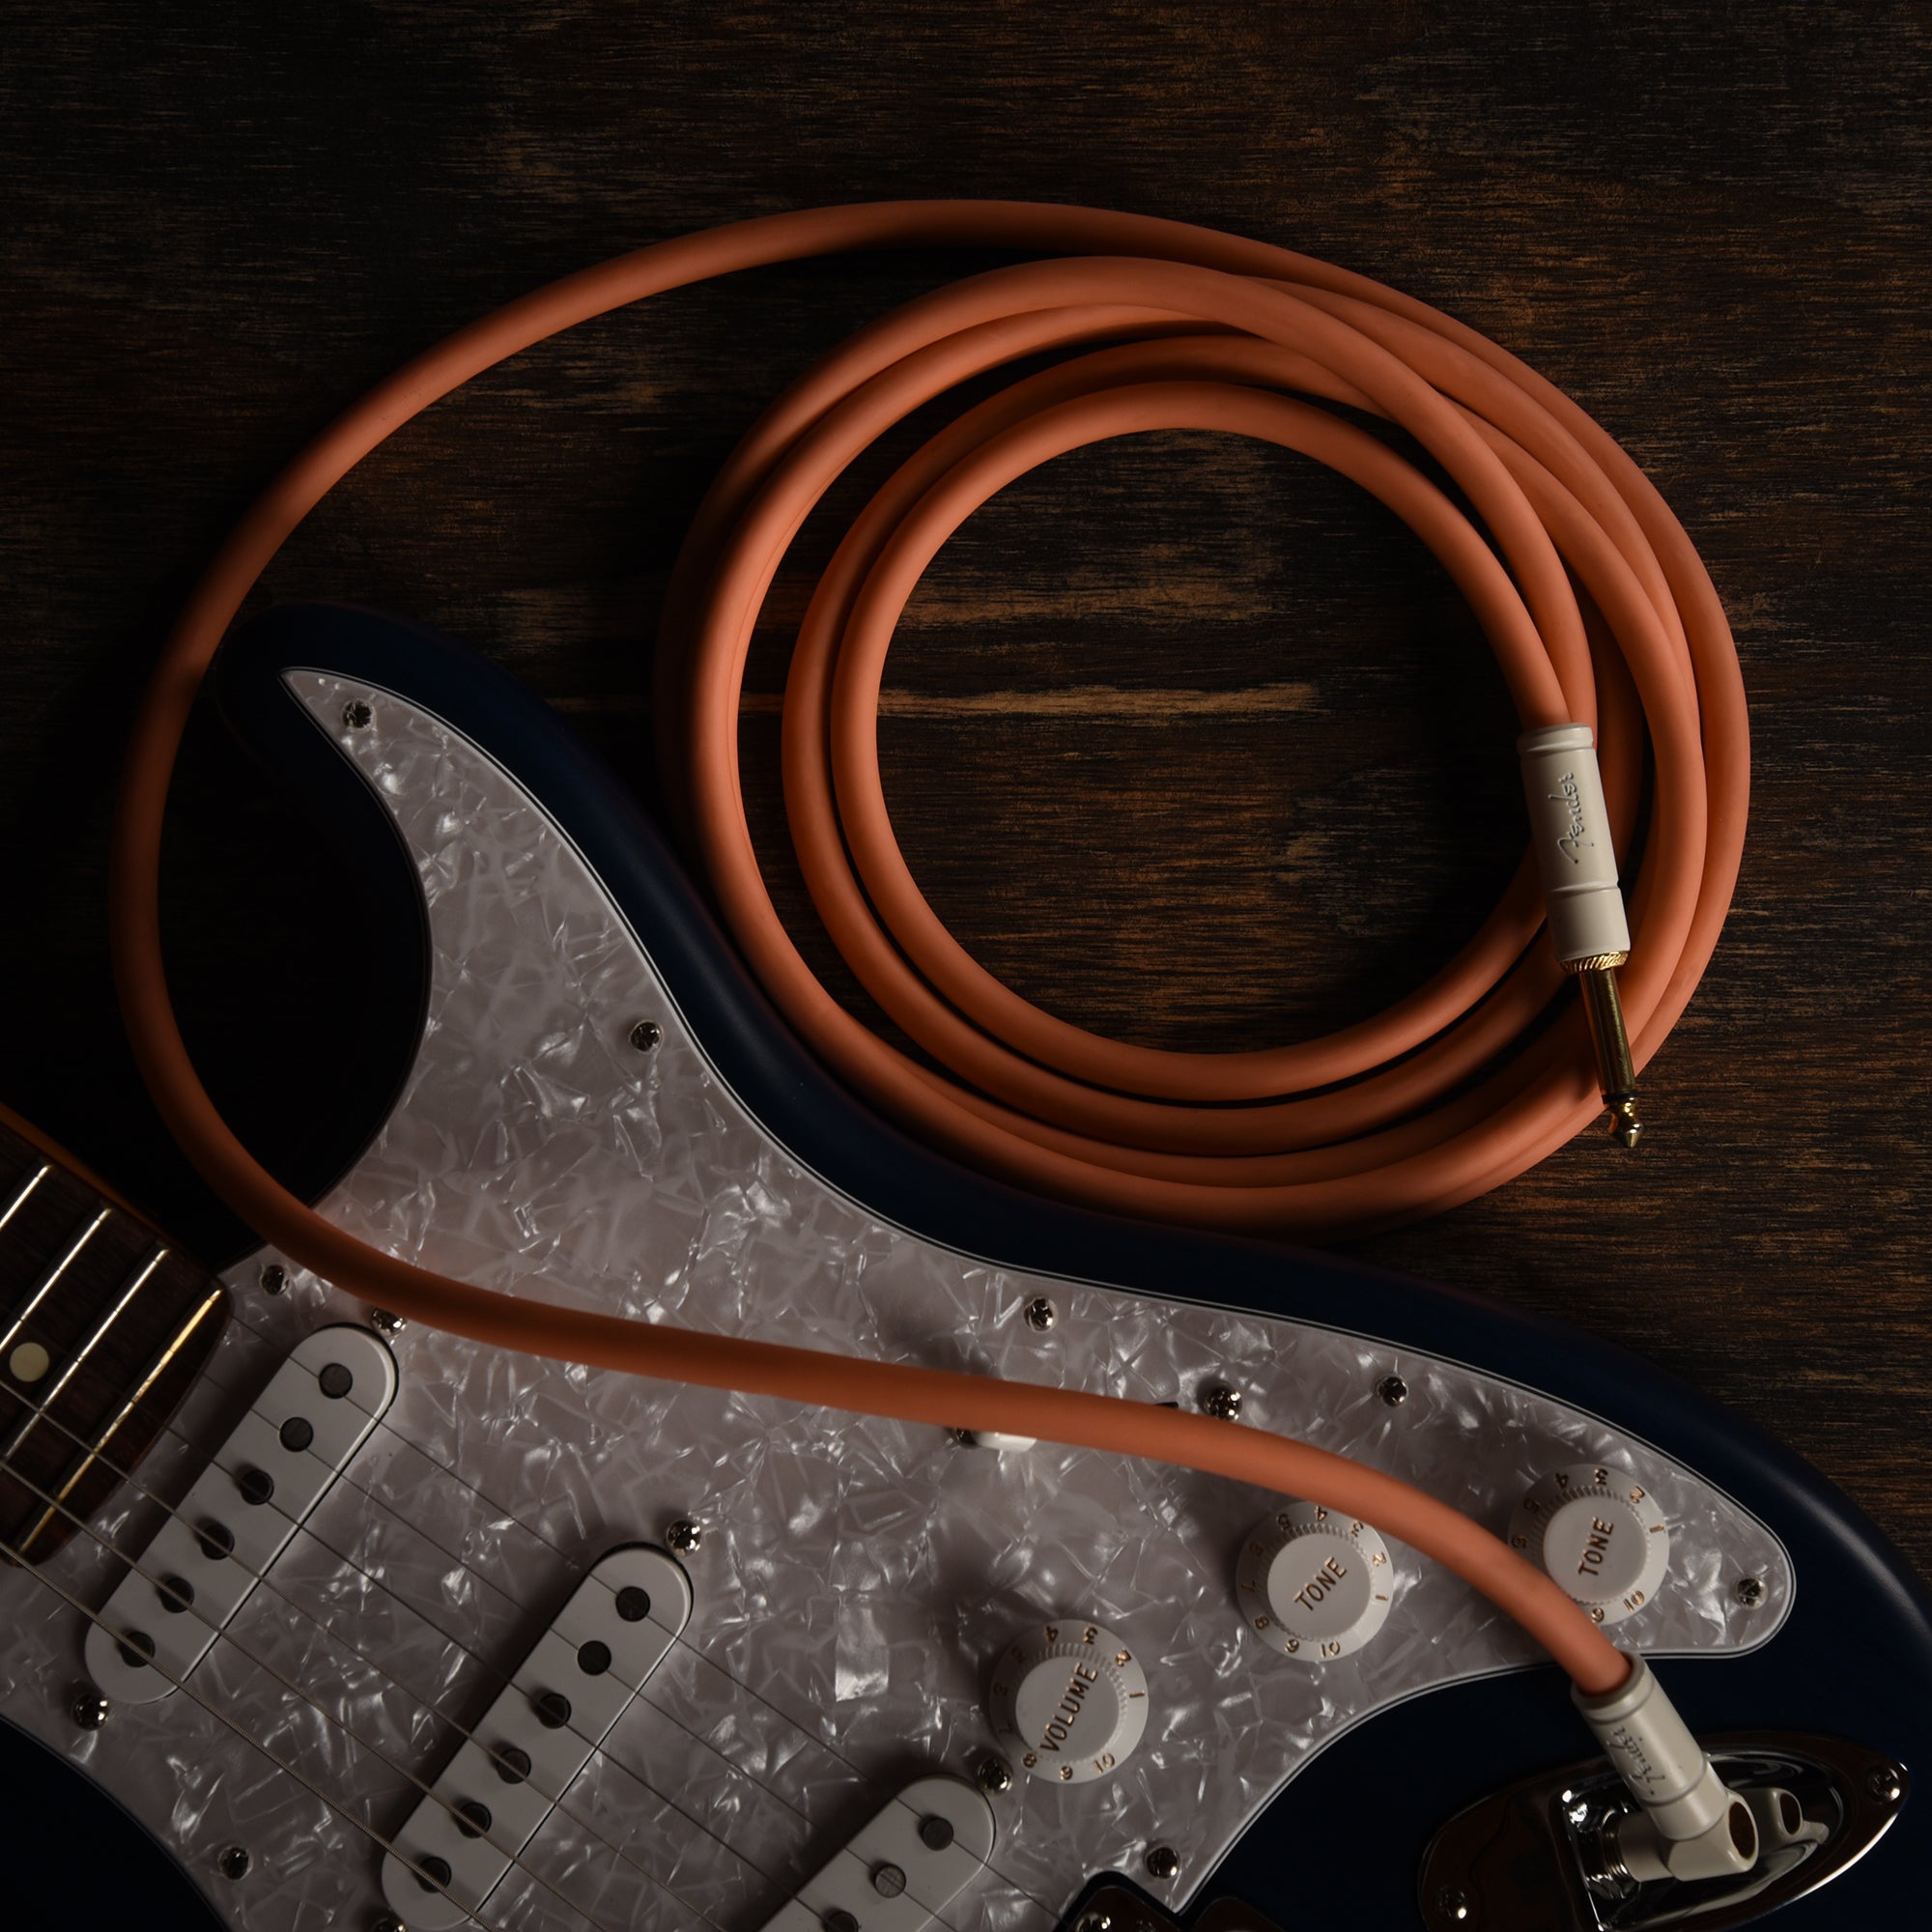 Fender Deluxe Instrument Cable Pacific Peach 10' Angle-Straight